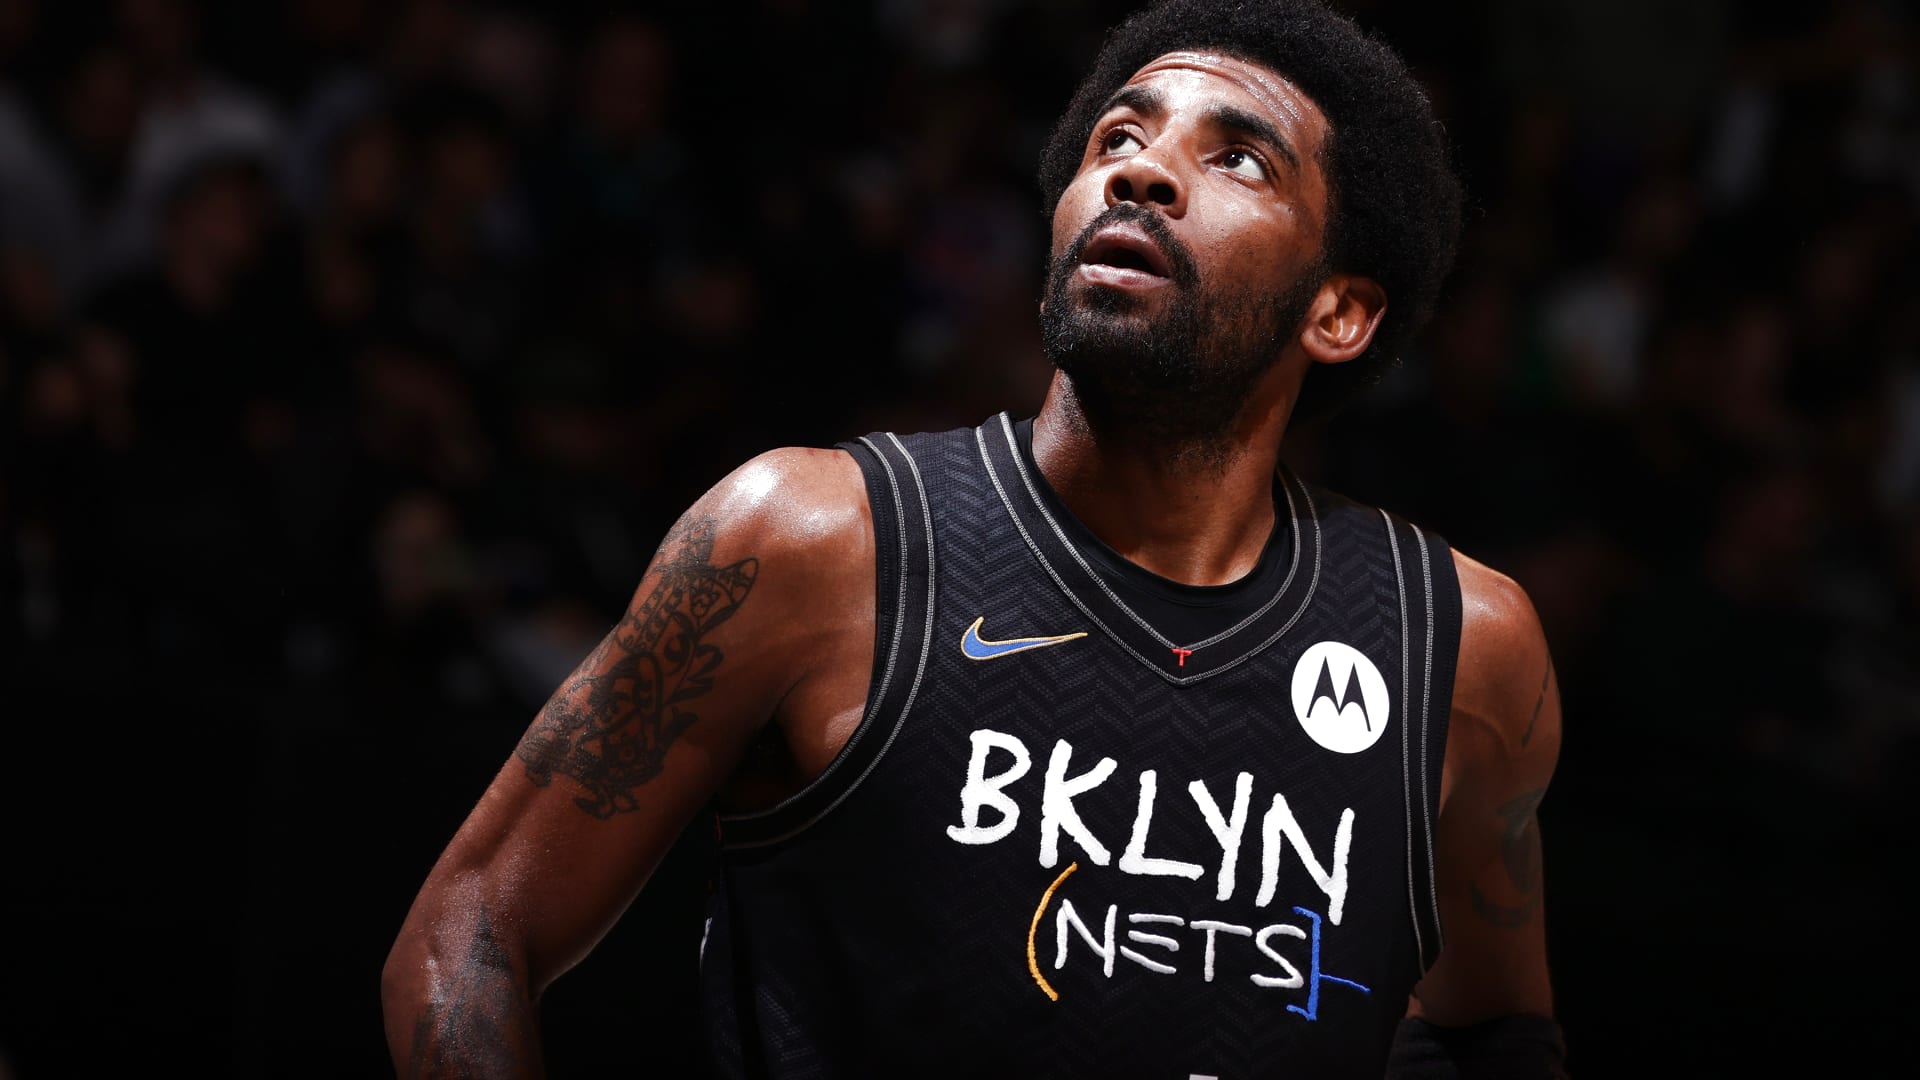 Kyrie Irving rejoins Nets, apologizes for hurt his actions caused